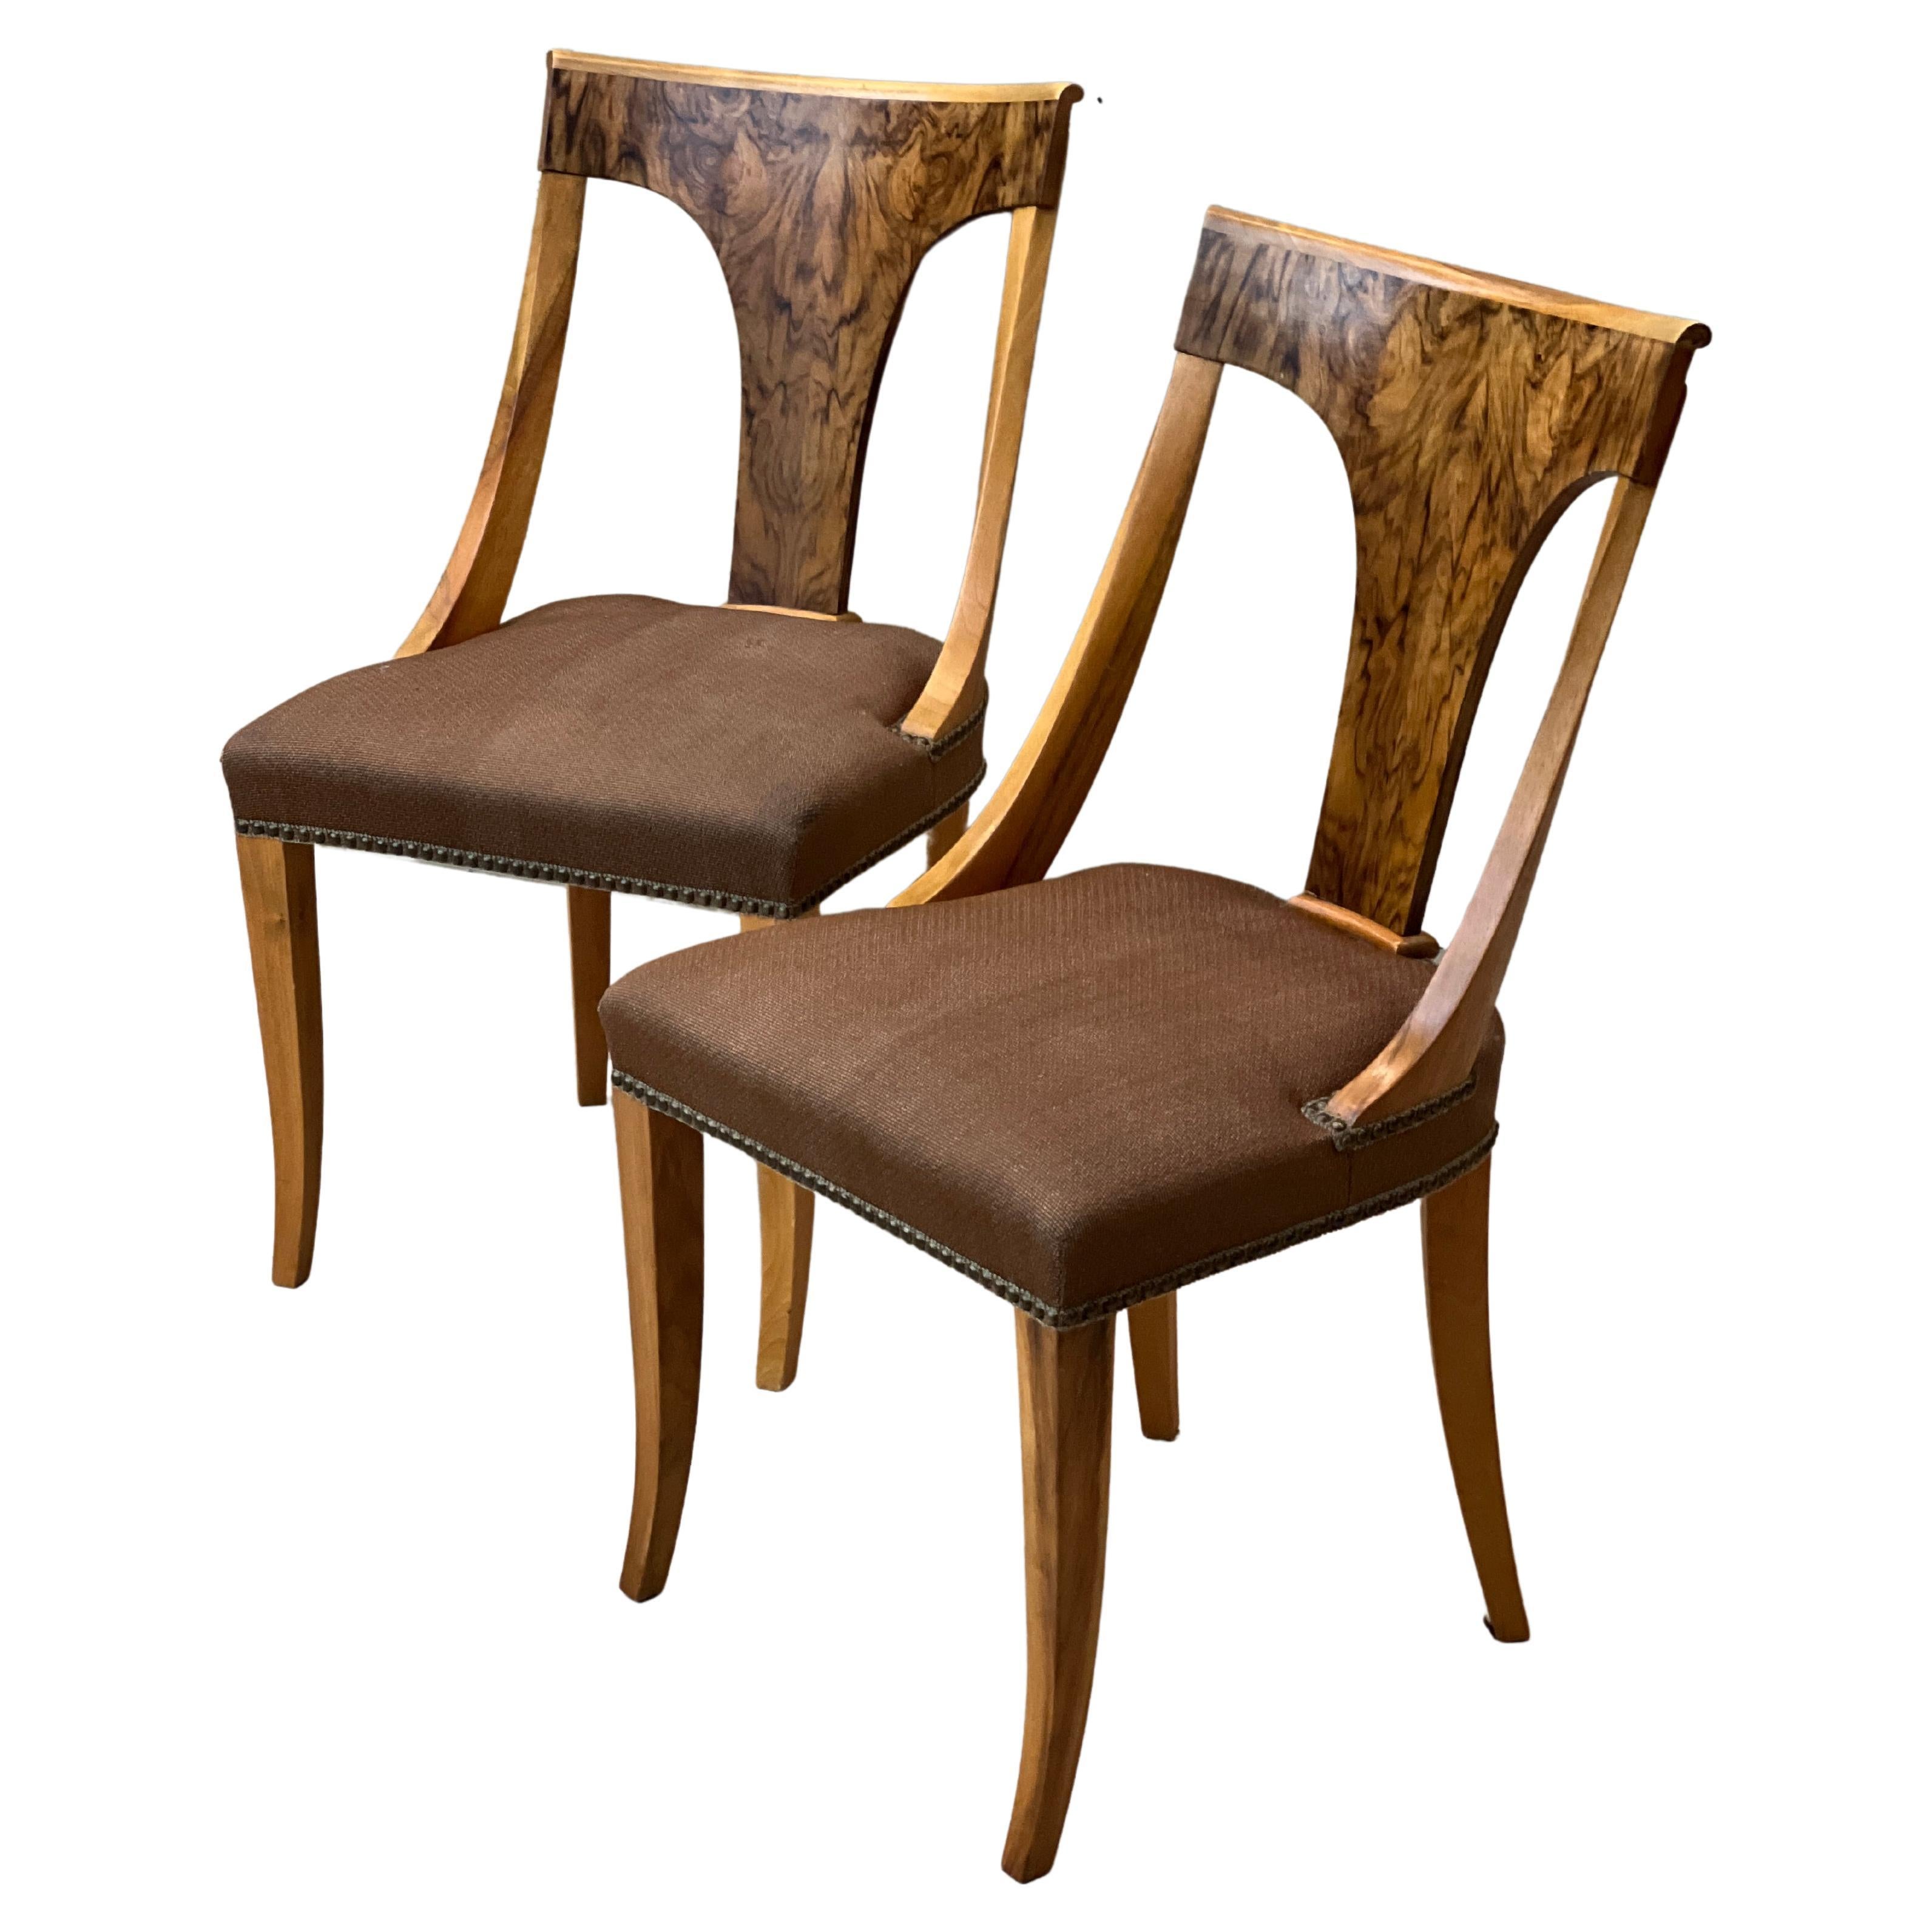 Pair of French Empire Chairs in Gondola Style, Walnut, 1840 ies For Sale